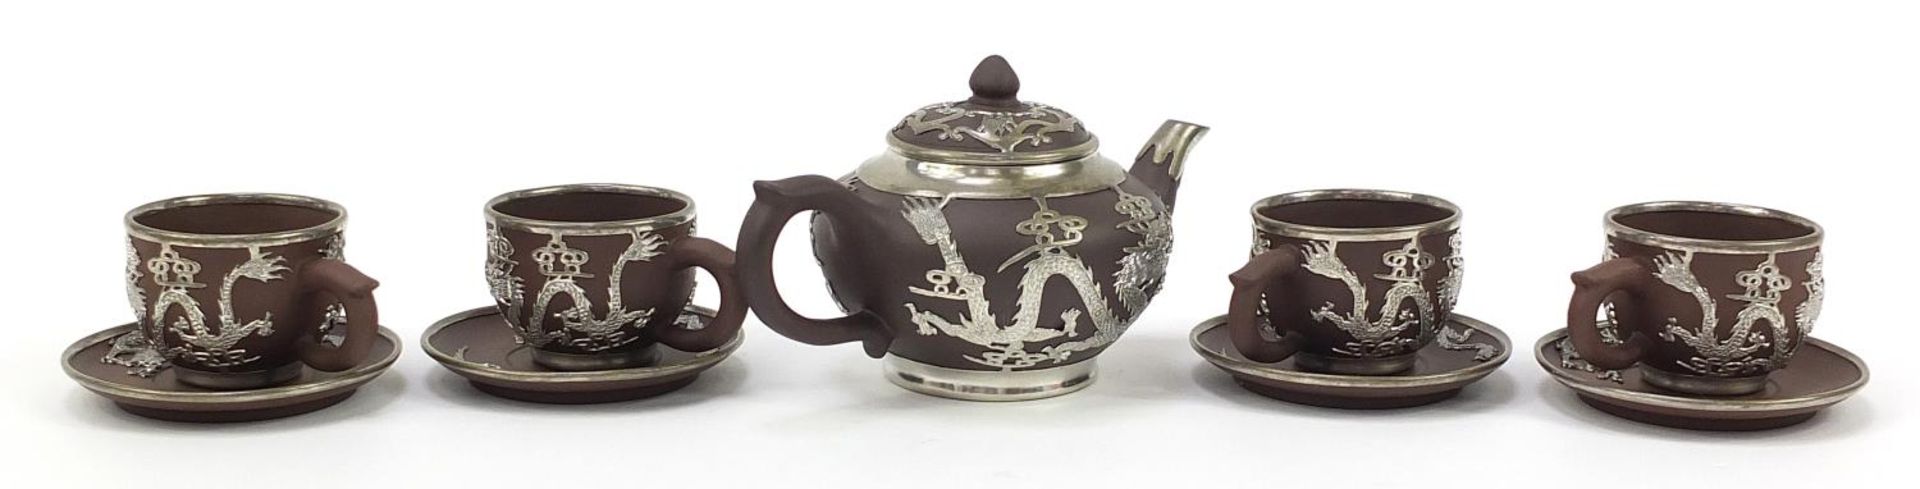 Chinese Yixing terracotta four place tea service with pewter dragon design overlay, various - Image 4 of 7